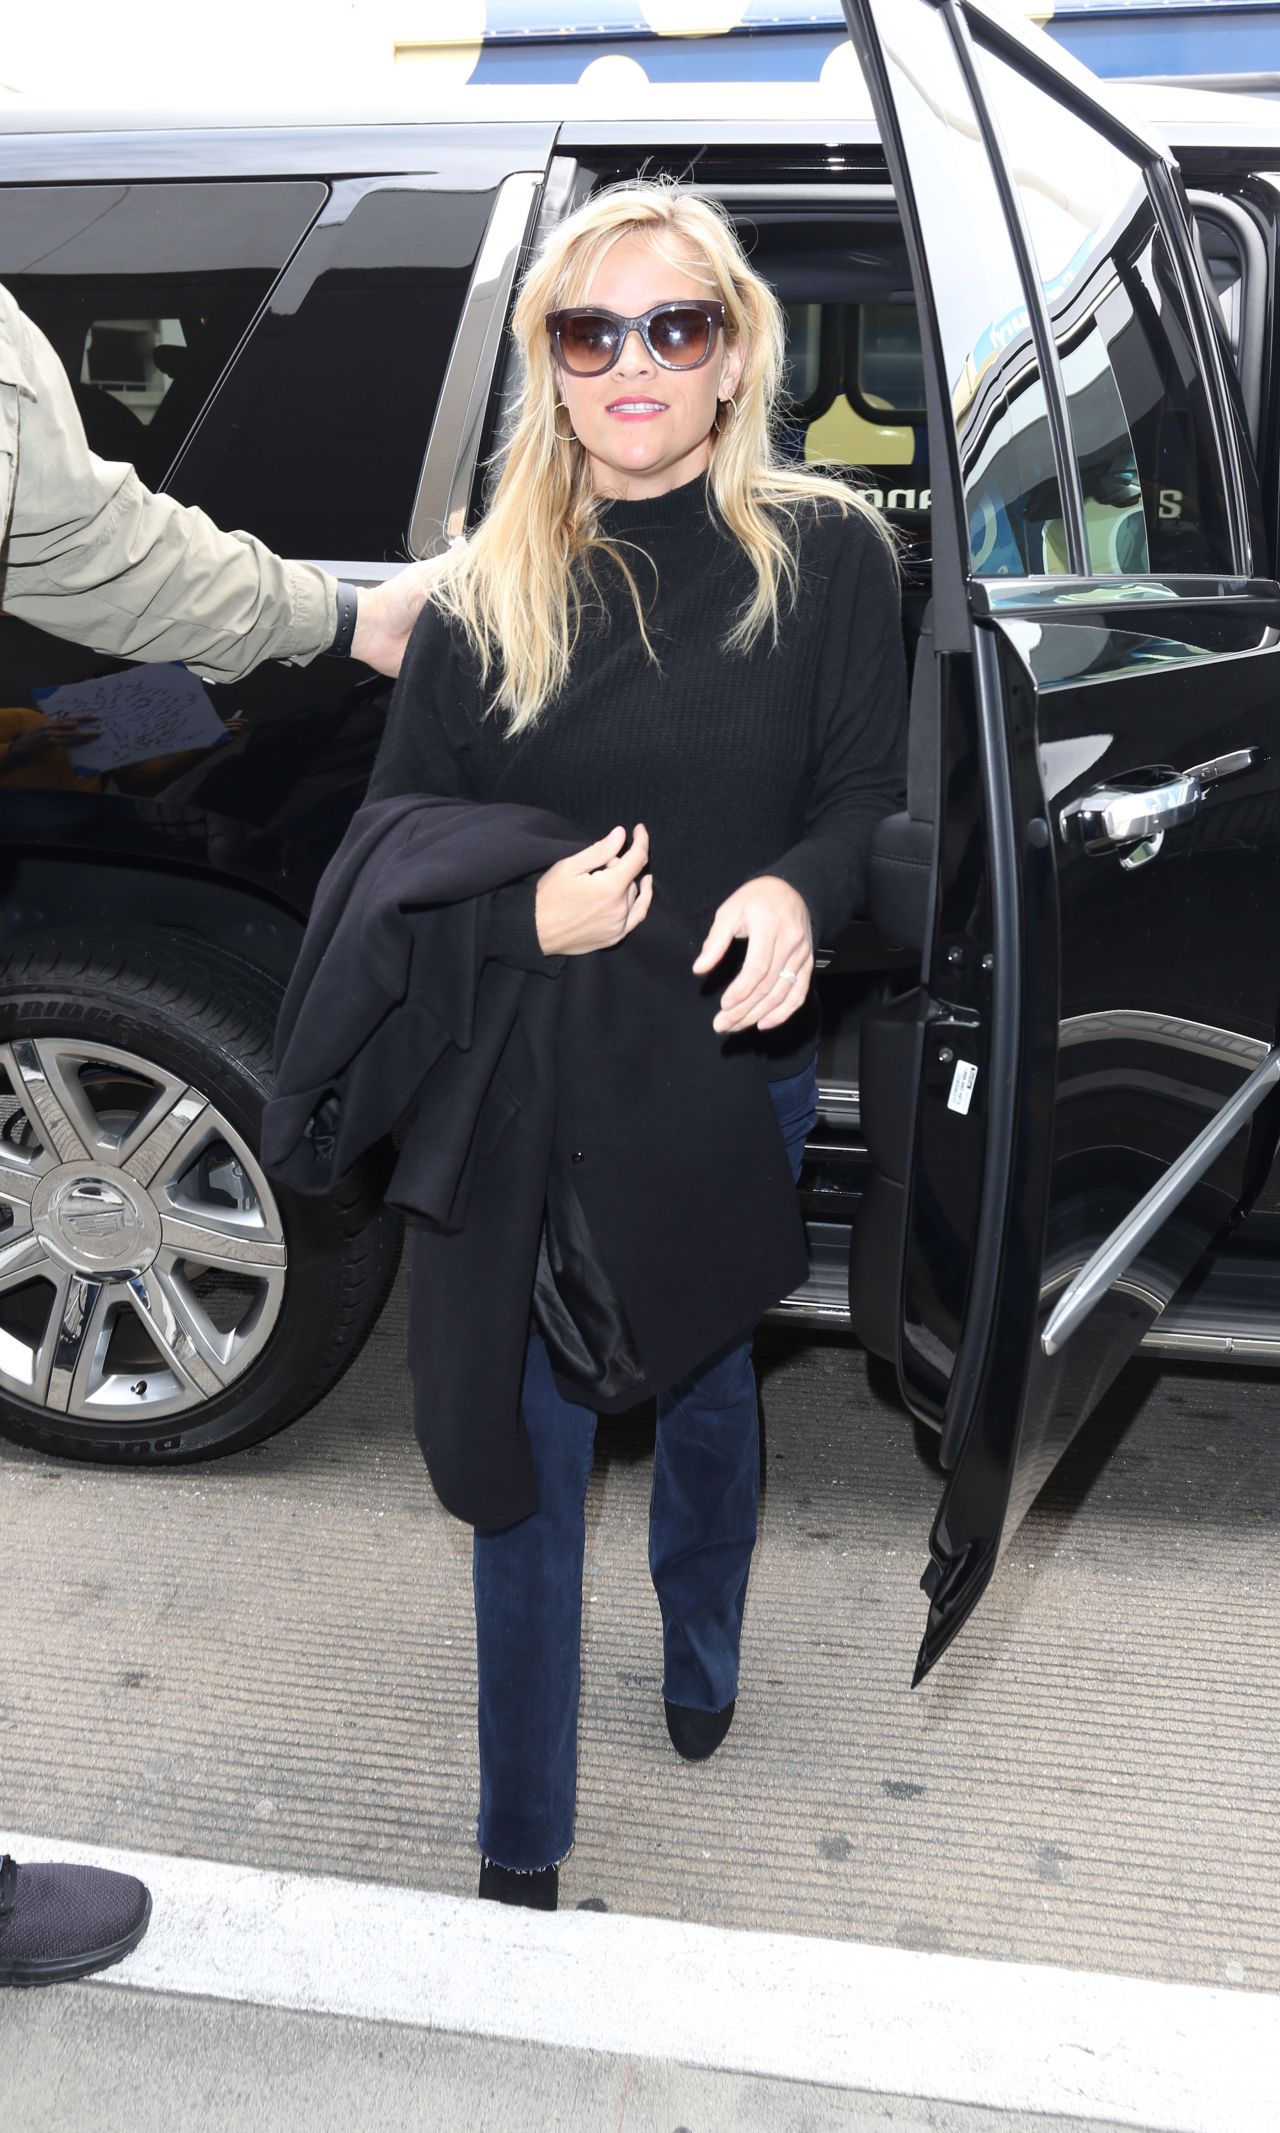 Reese Witherspoon Los Angeles Airport July 8, 2020 – Star Style